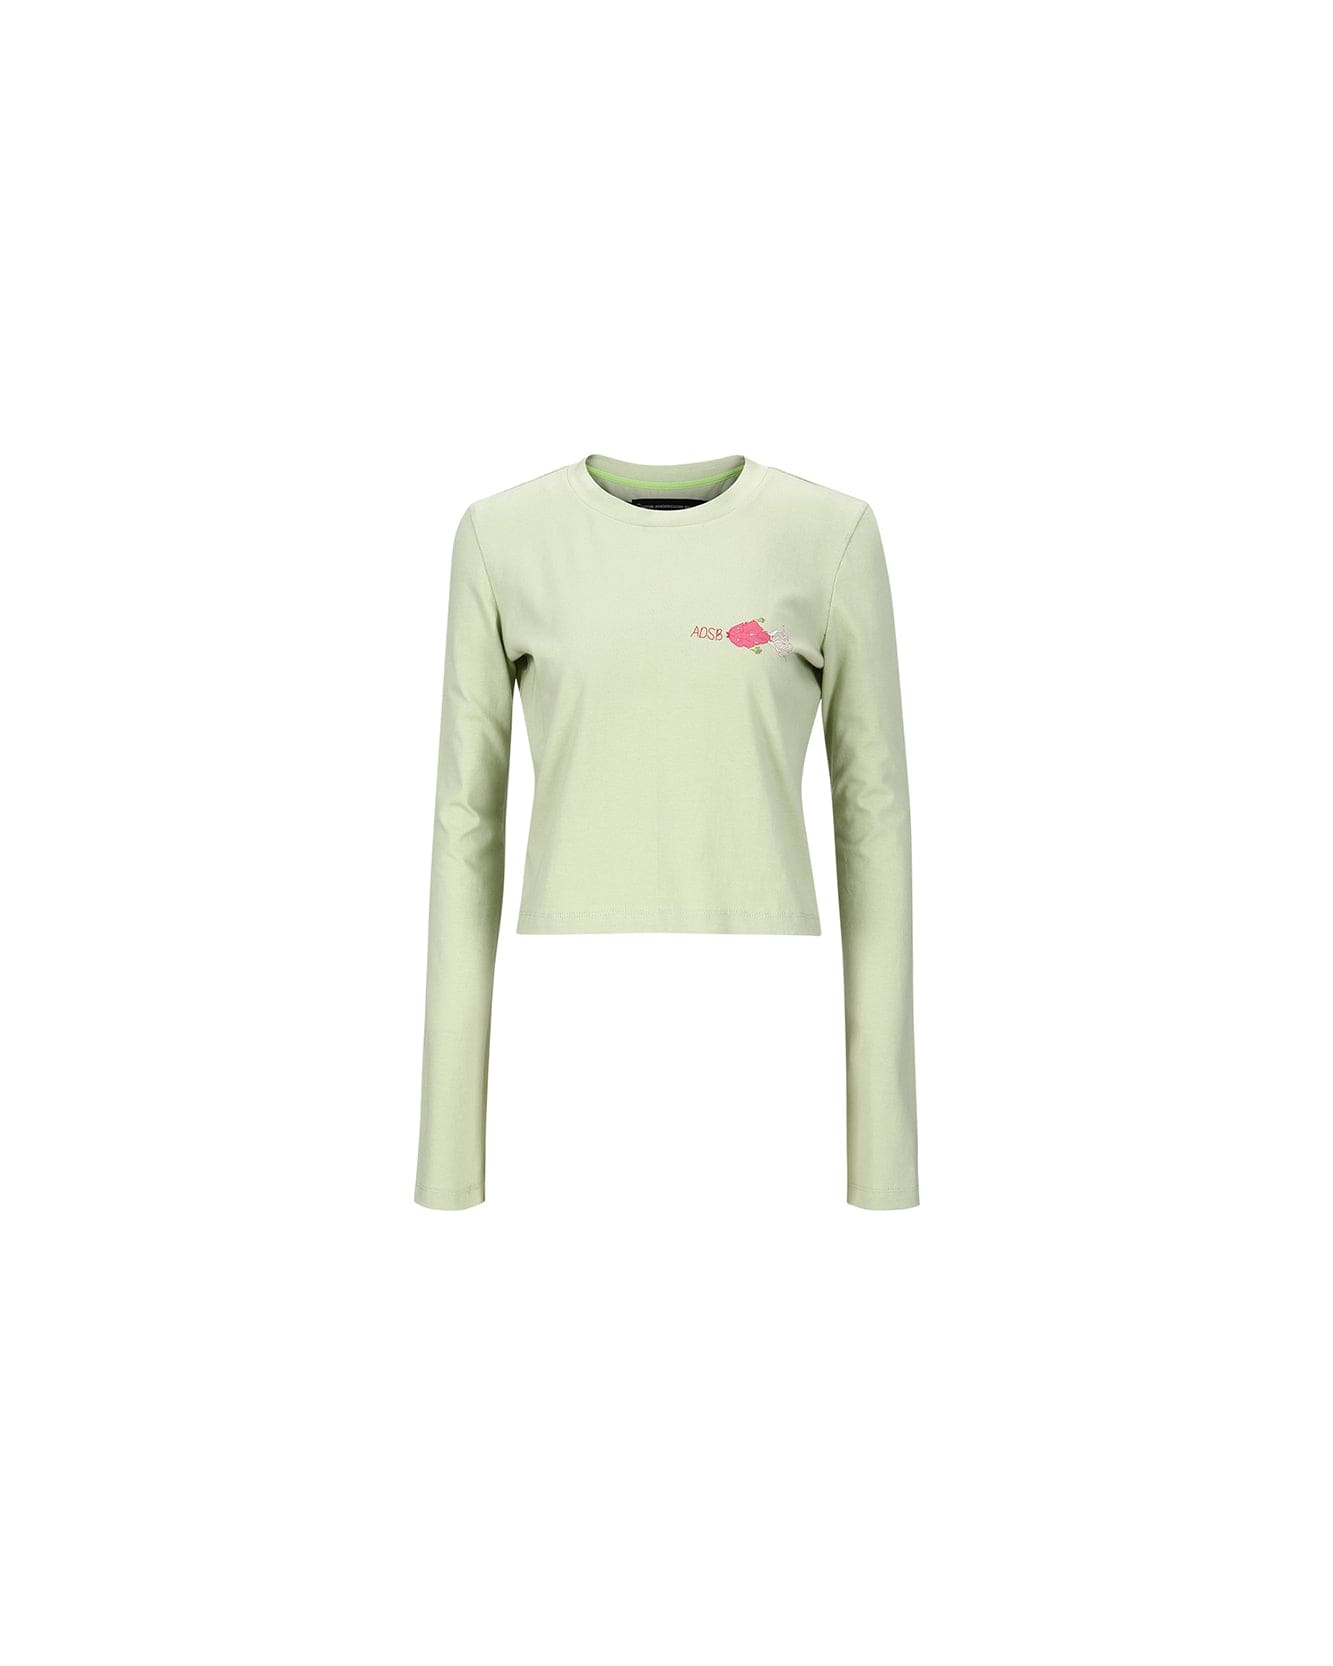 ESSENTIAL) (WOMEN) T-SHIRTS atb1004w(GREEN) Bell FISH CRAZY Andersson –